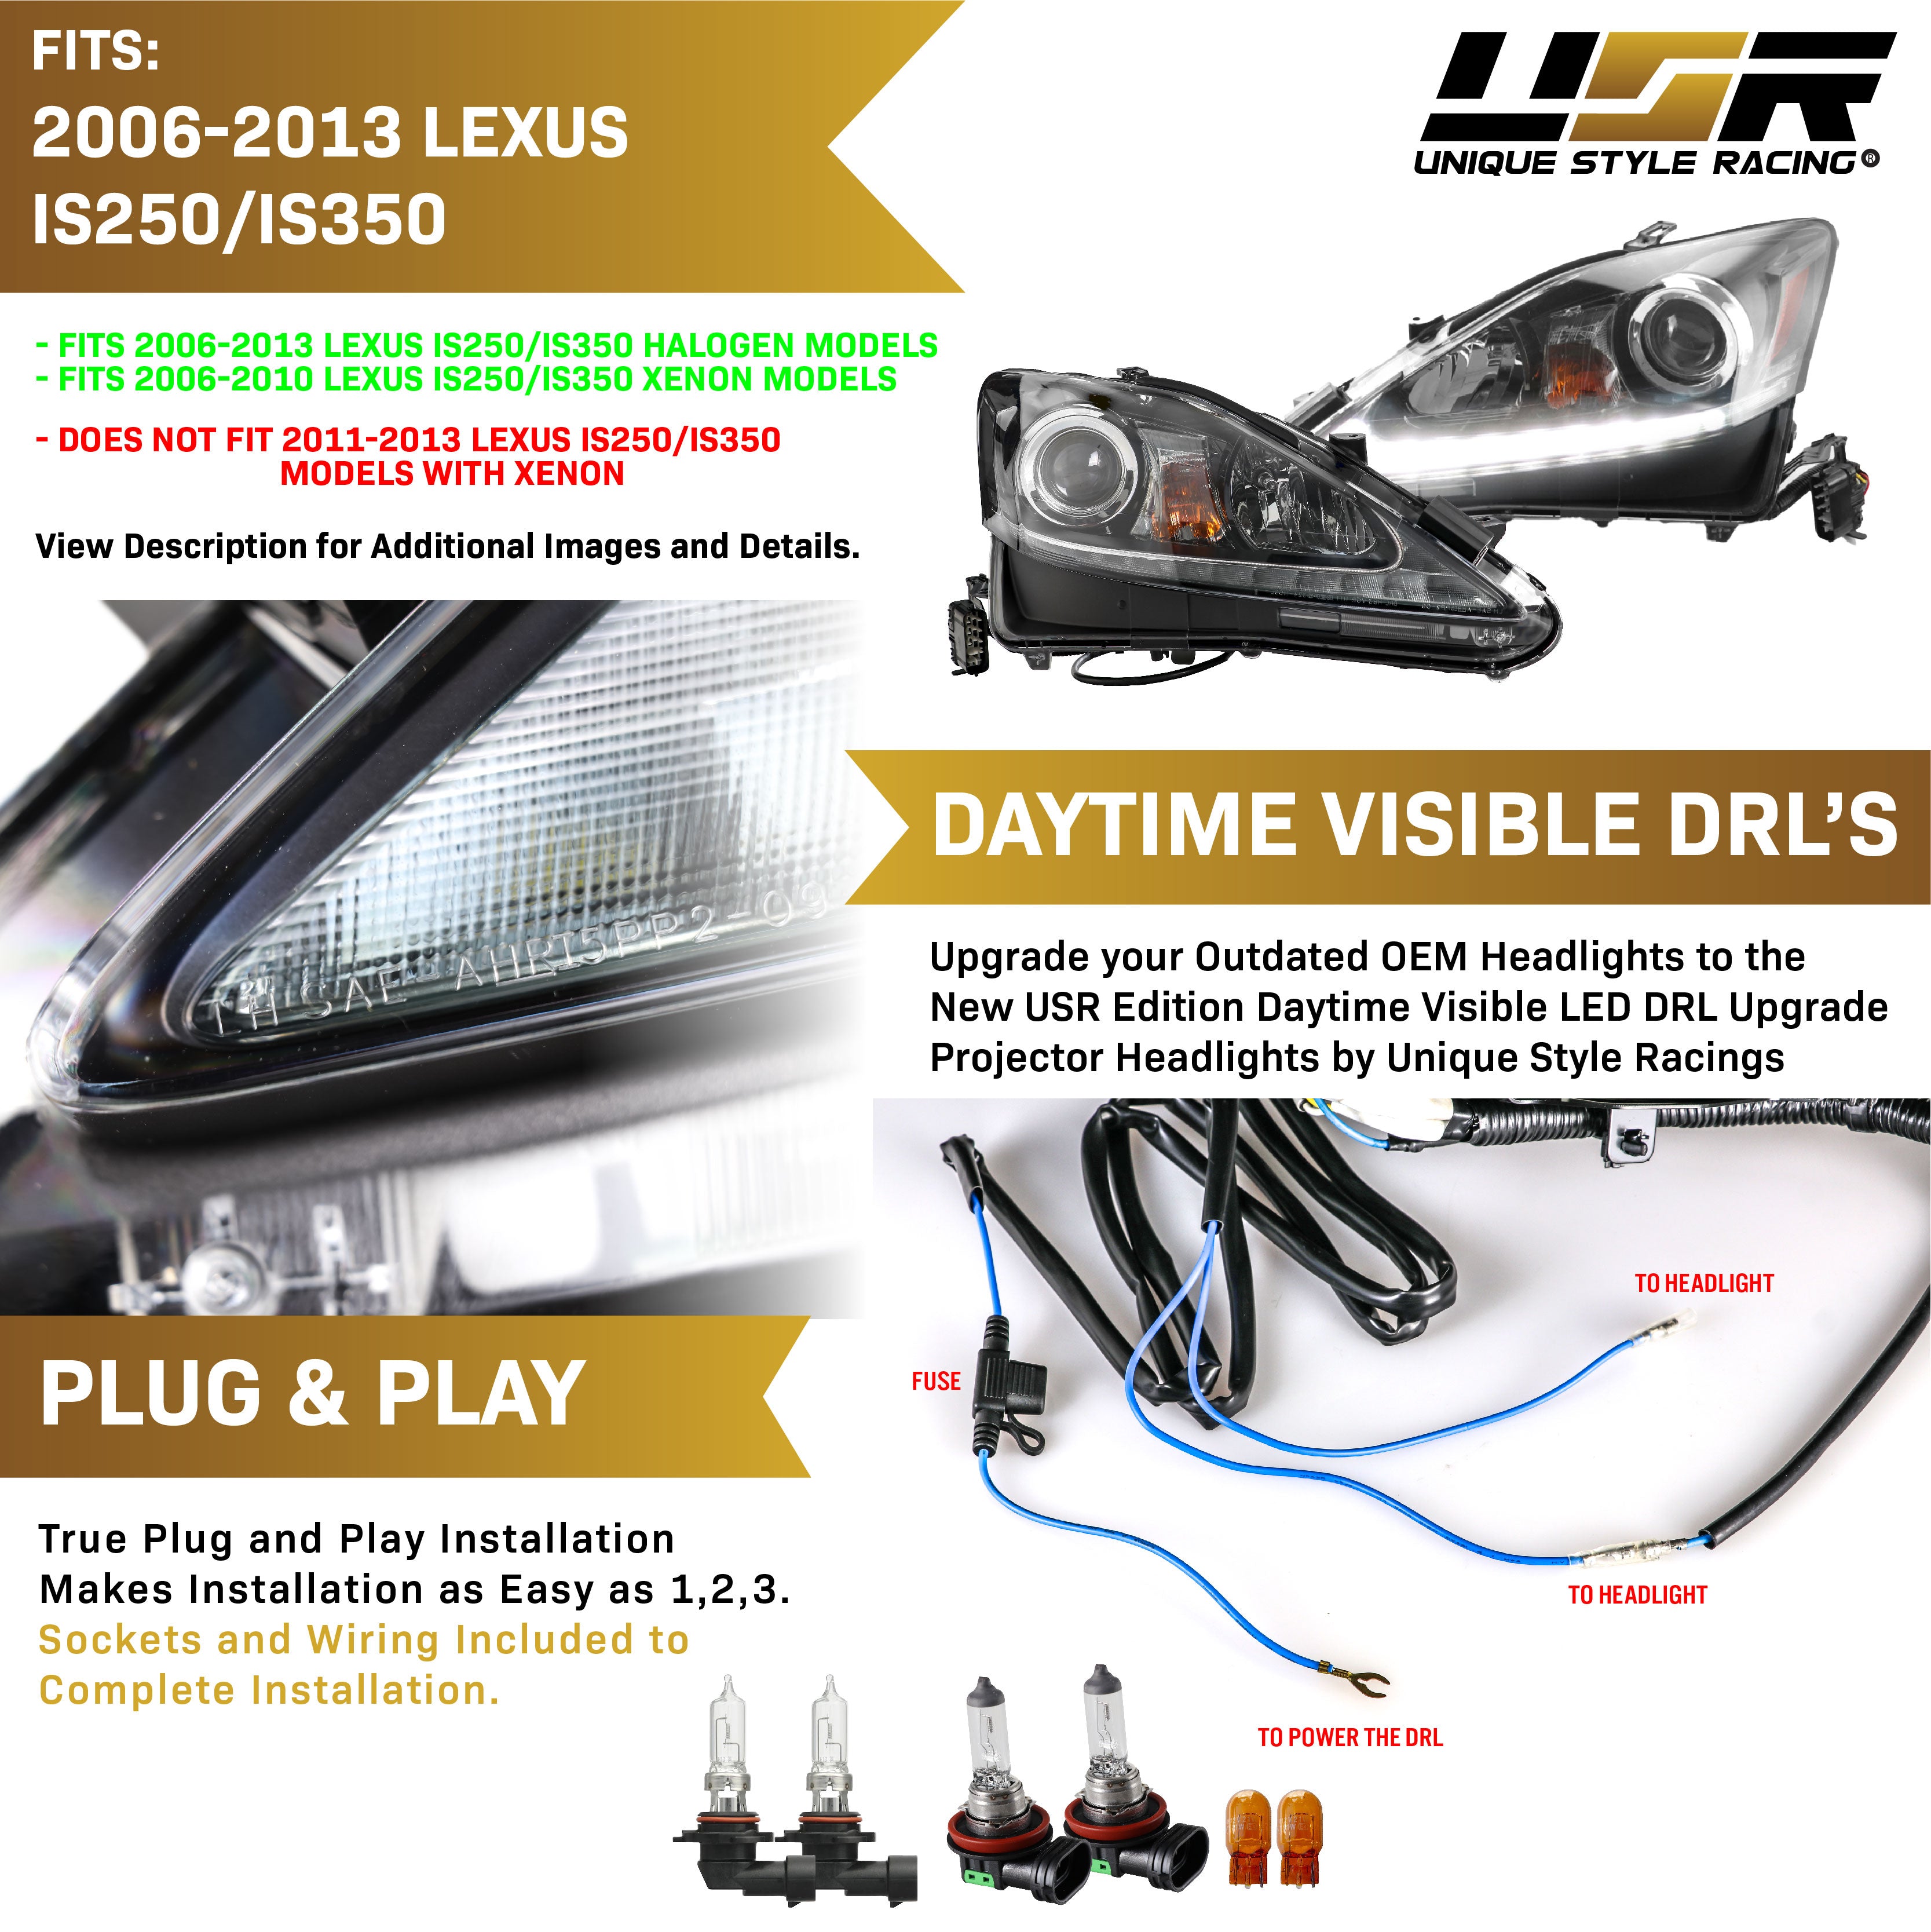 2006-2013 Lexus IS250 IS350 ISF USR Edition Daytime Visible DRL LED Check  Mark Black Projector Headlight